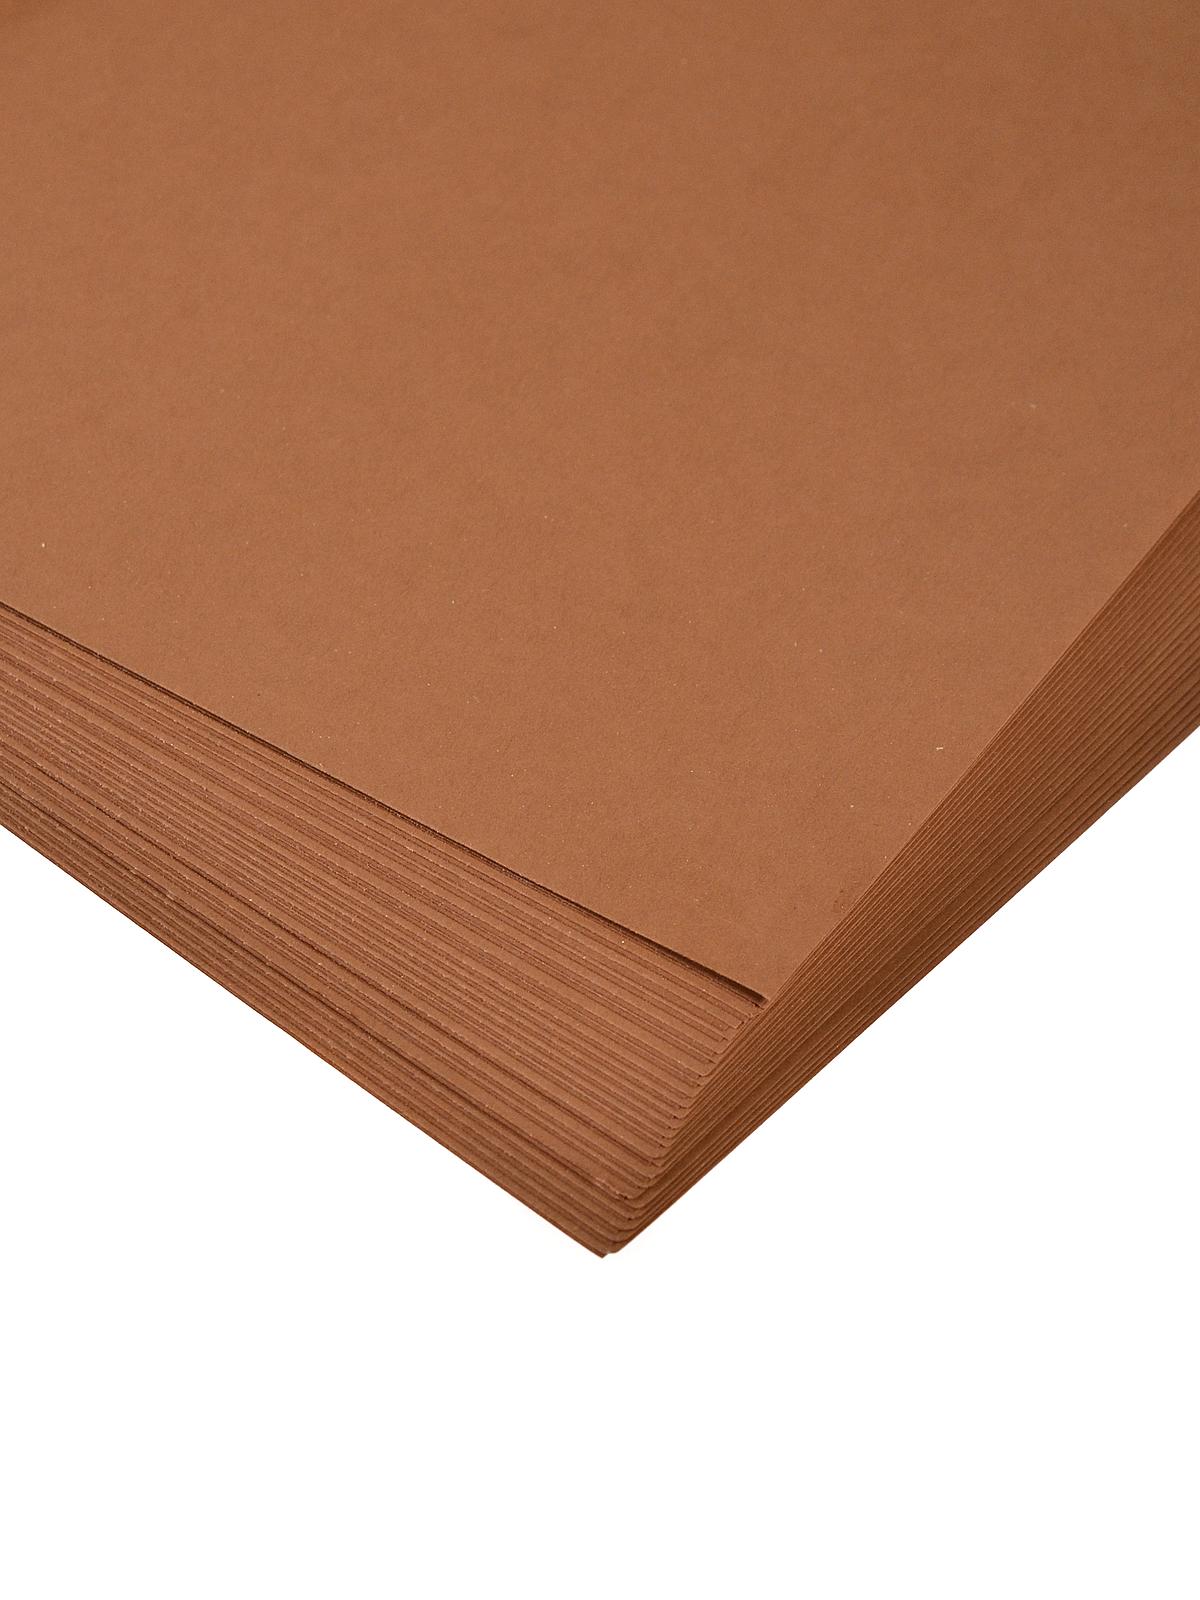 Sulphite Construction Paper Warm Brown 12 In. X 18 In. 50 Sheets